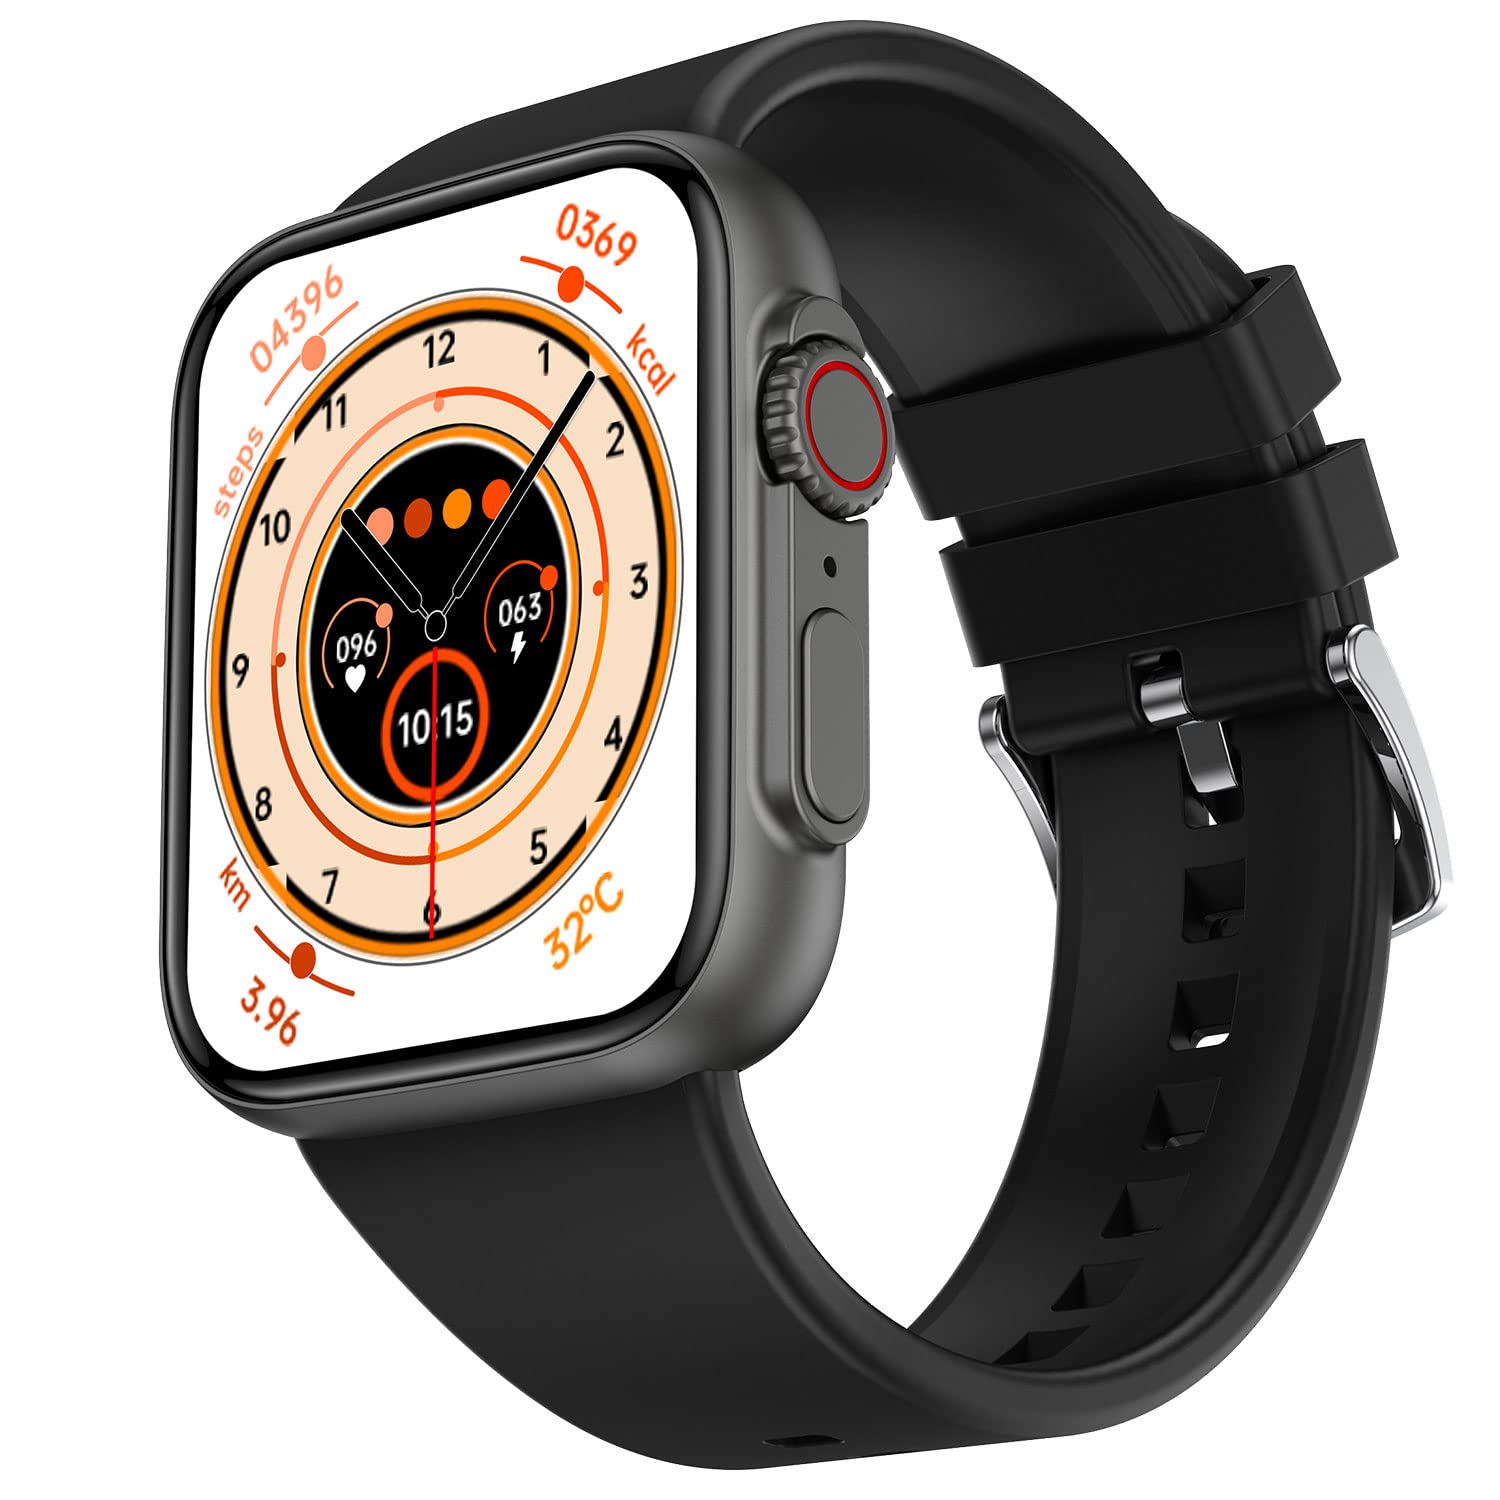 Fire-Boltt Gladiator 1.96" Biggest Display Smart Watch with Bluetooth Calling, Voice Assistant &123 Sports Modes, 8 Unique UI Interactions, SpO2, 24/7 Heart Rate Tracking, Black